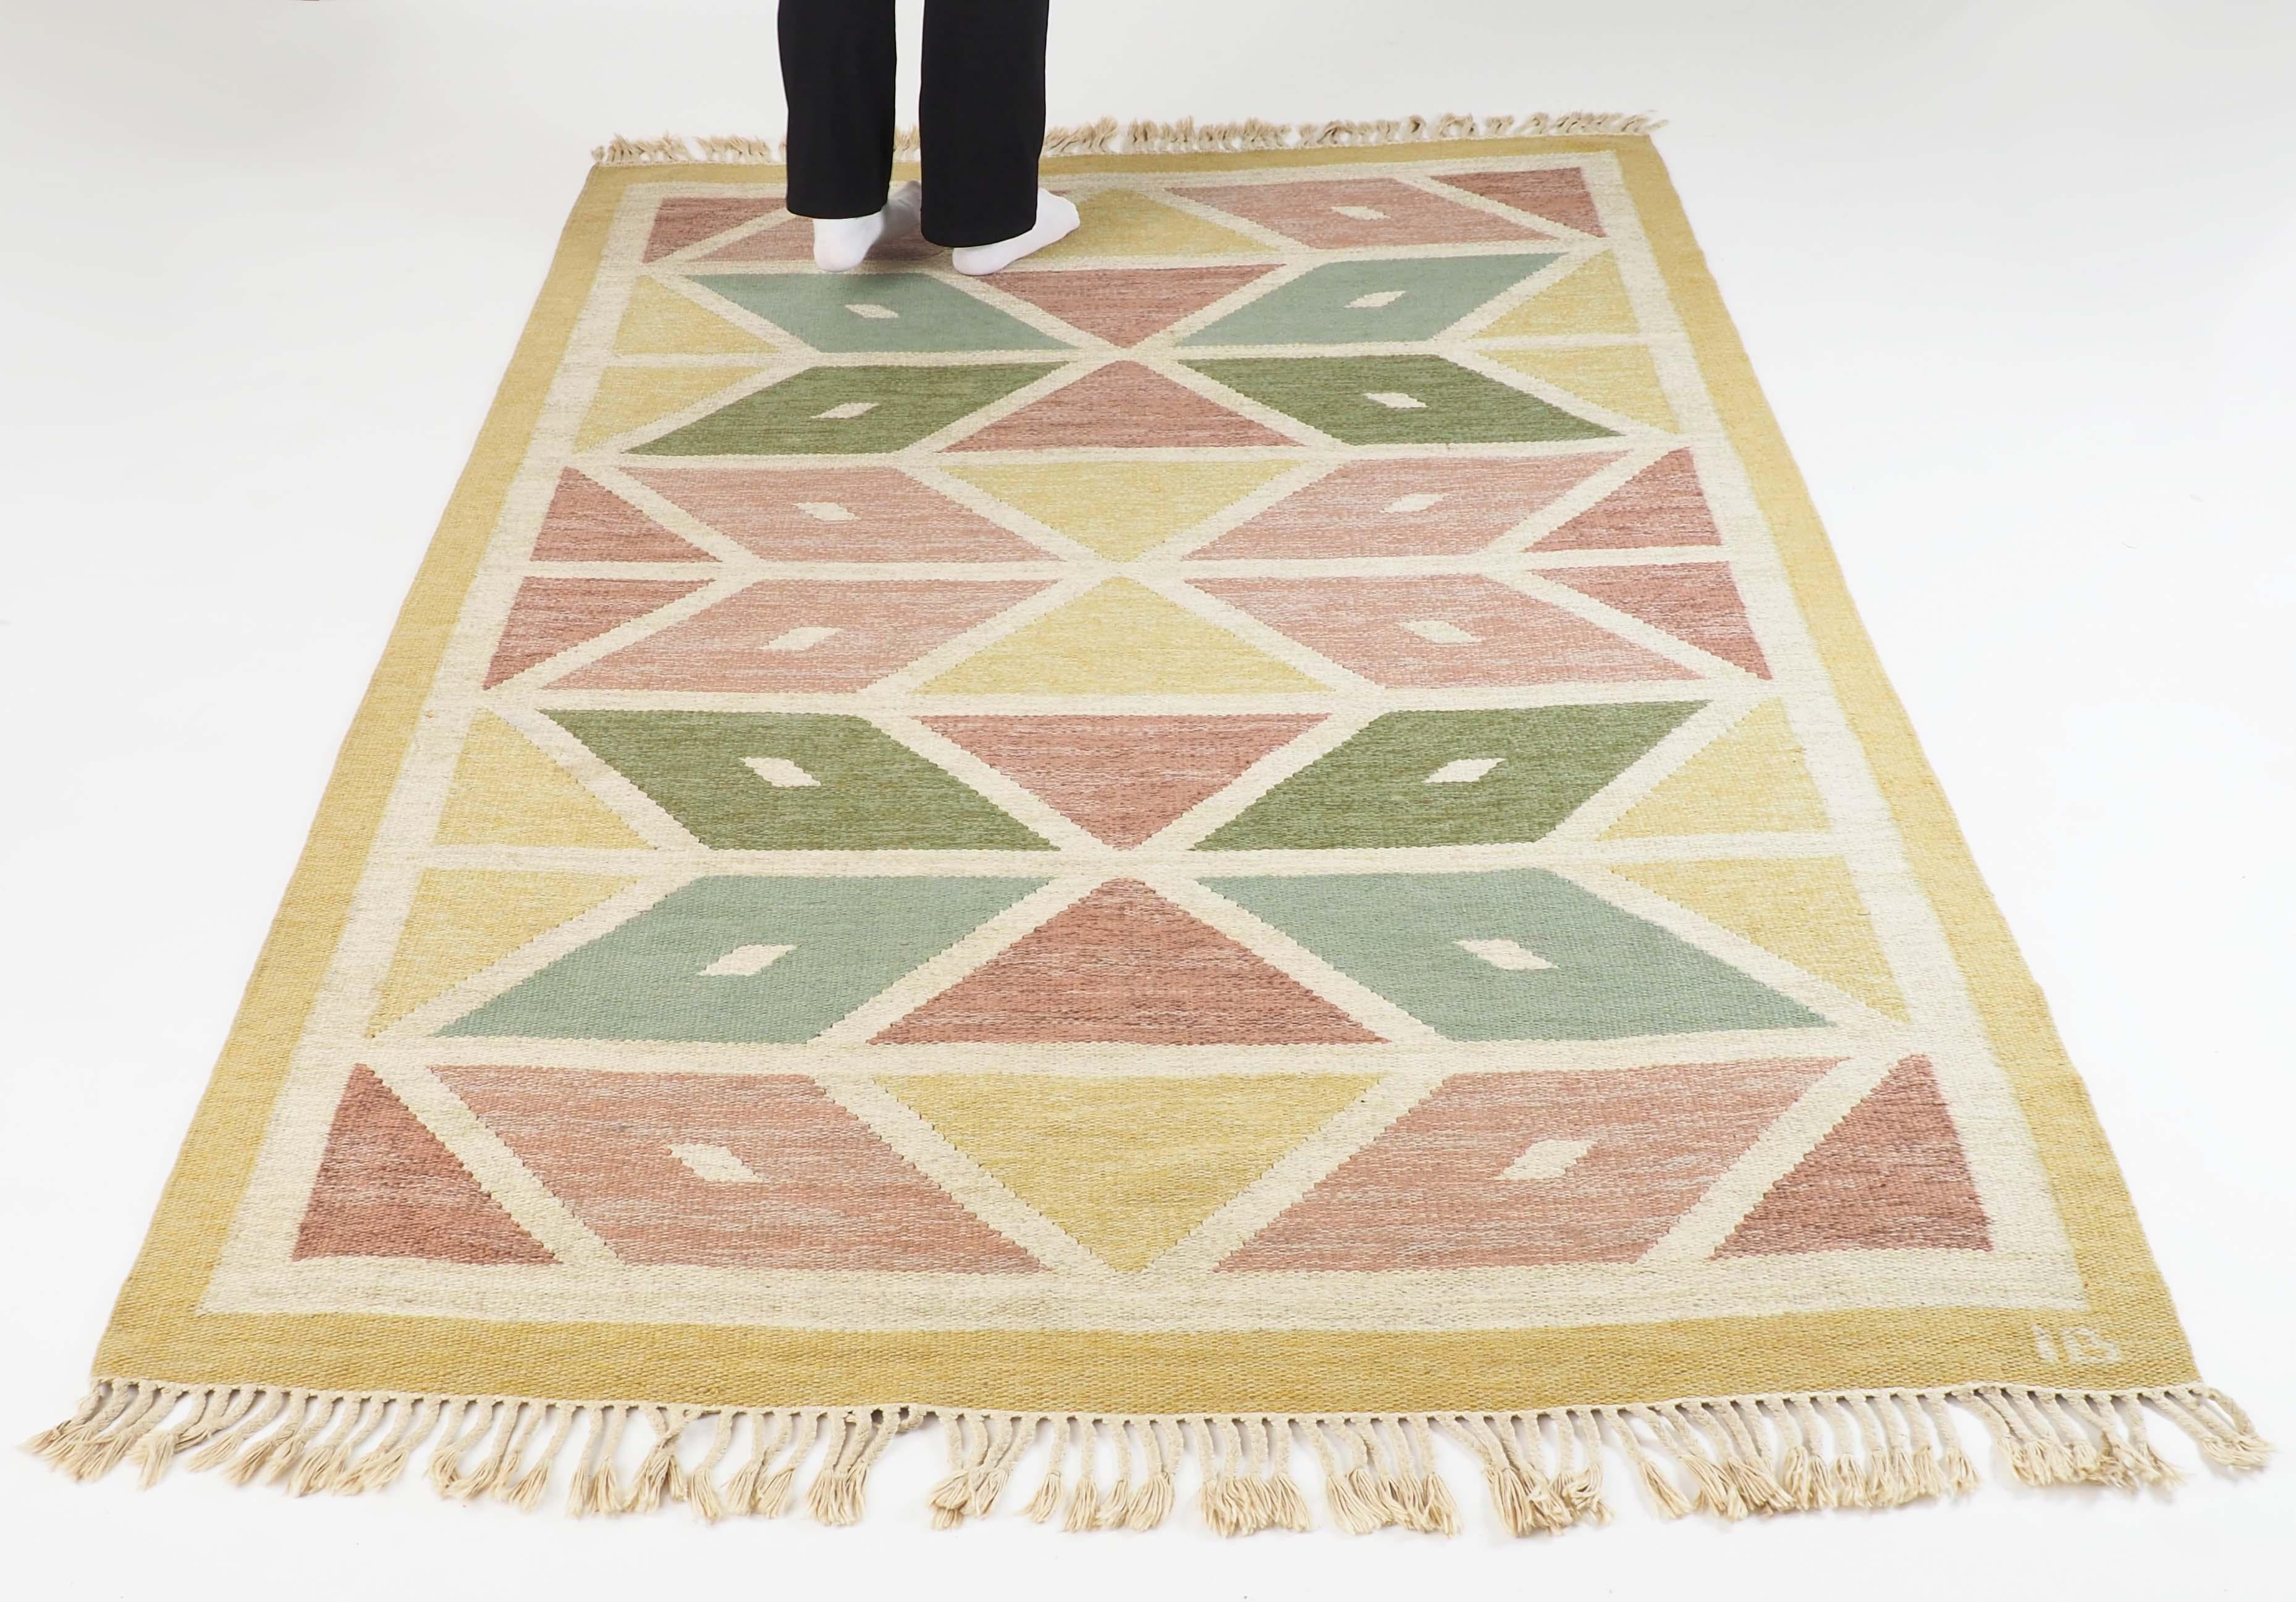 Swedish flat-woven rug in wool. Handmade in the 1950s and signed IB by the artist. Diamond shaped pattern in a strict geometrical design.